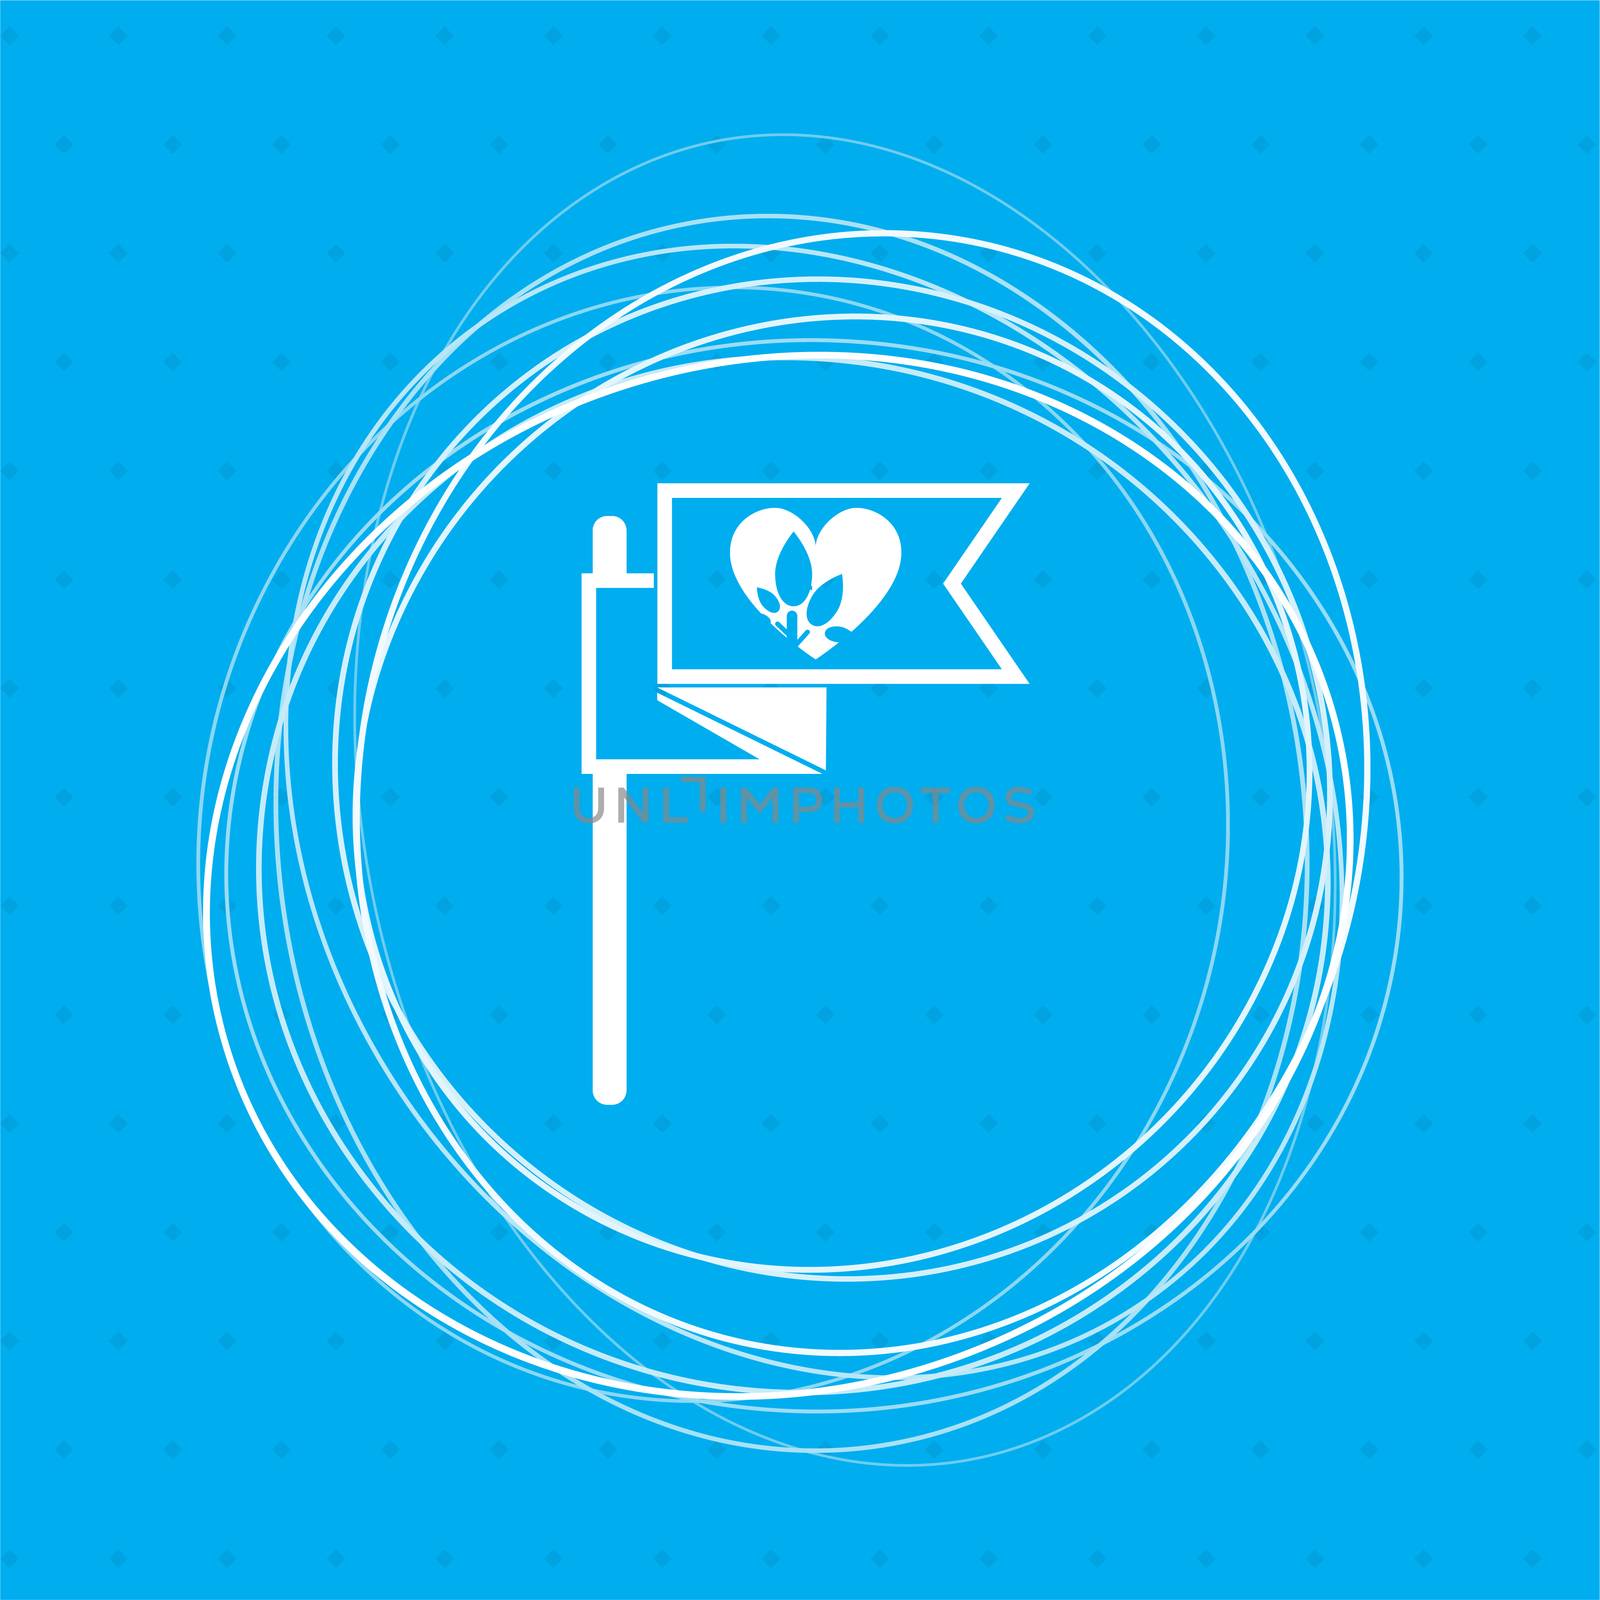 Flag, heart icon on a blue background with abstract circles around and place for your text.  by Adamchuk